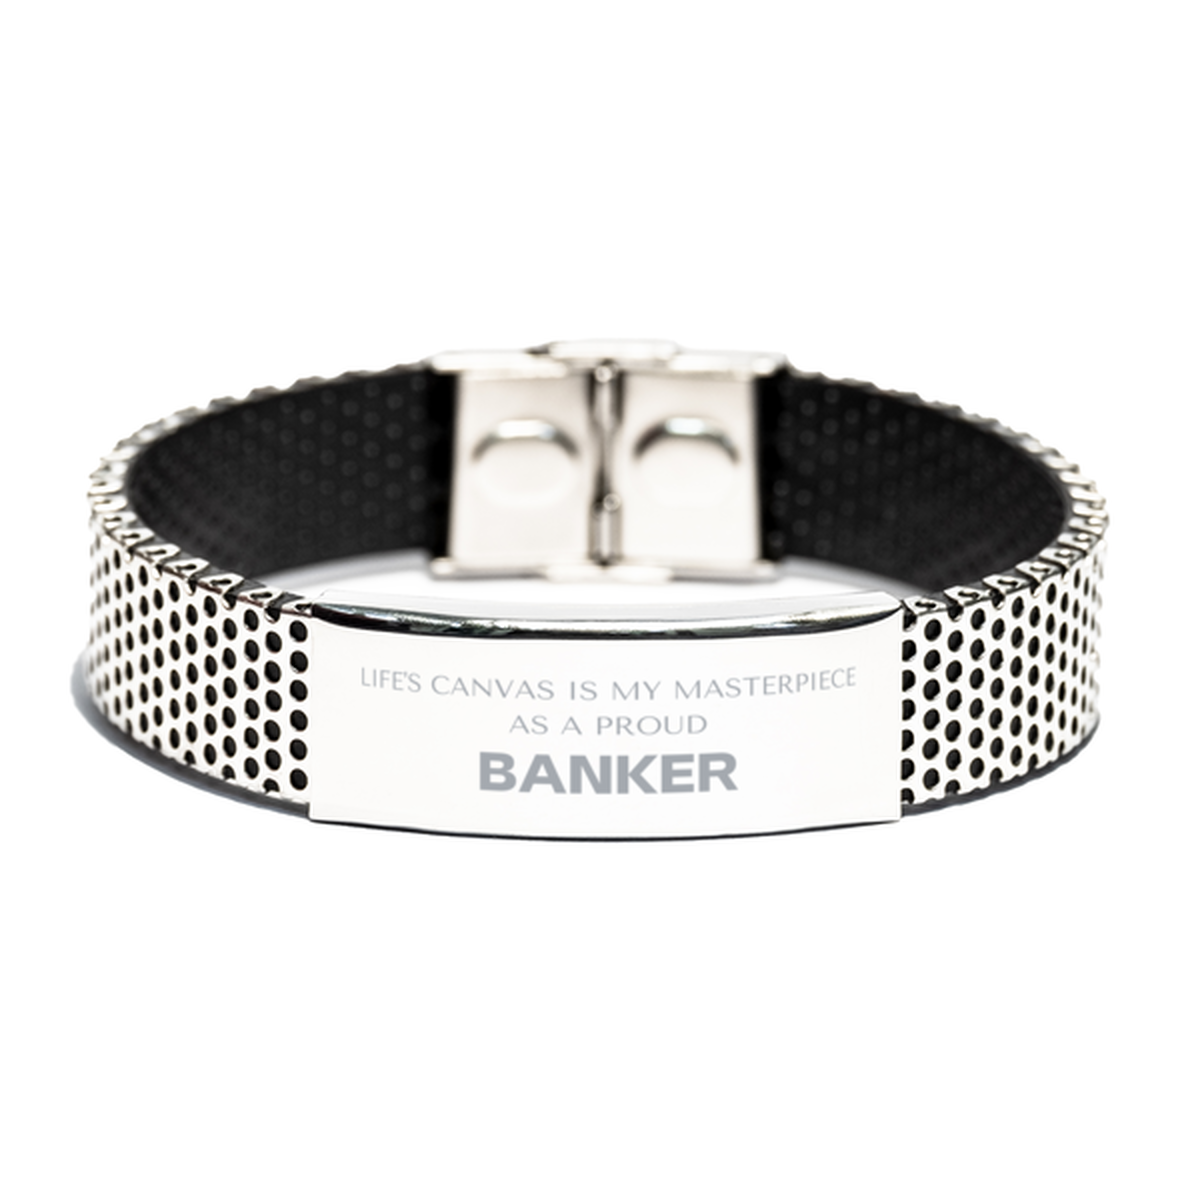 Proud Banker Gifts, Life's canvas is my masterpiece, Epic Birthday Christmas Unique Stainless Steel Bracelet For Banker, Coworkers, Men, Women, Friends